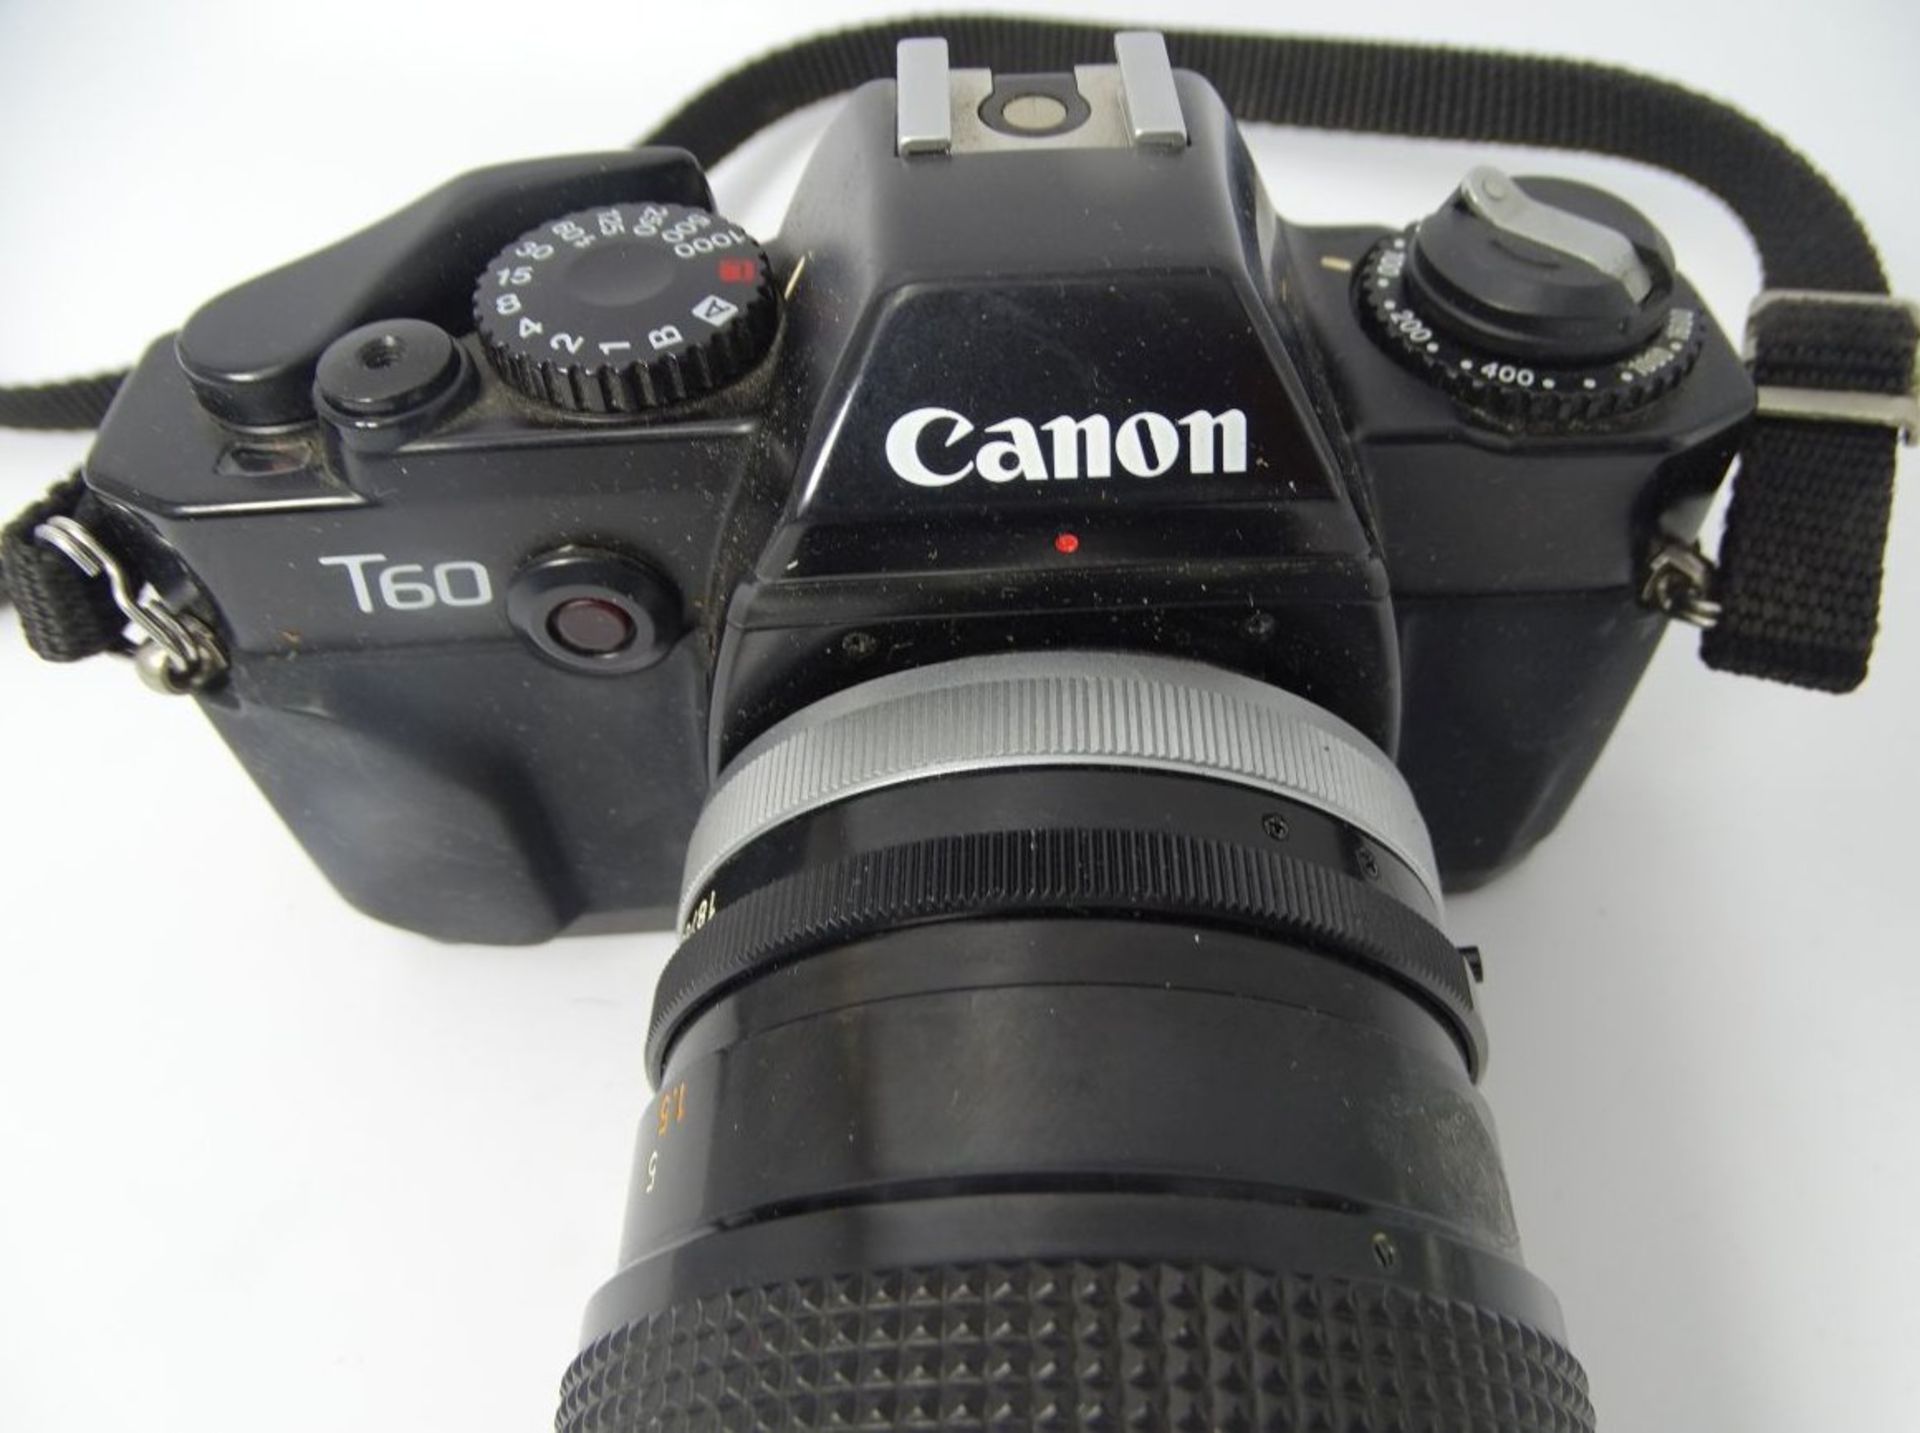 Fotoapparat "Canon T60" - Image 2 of 5